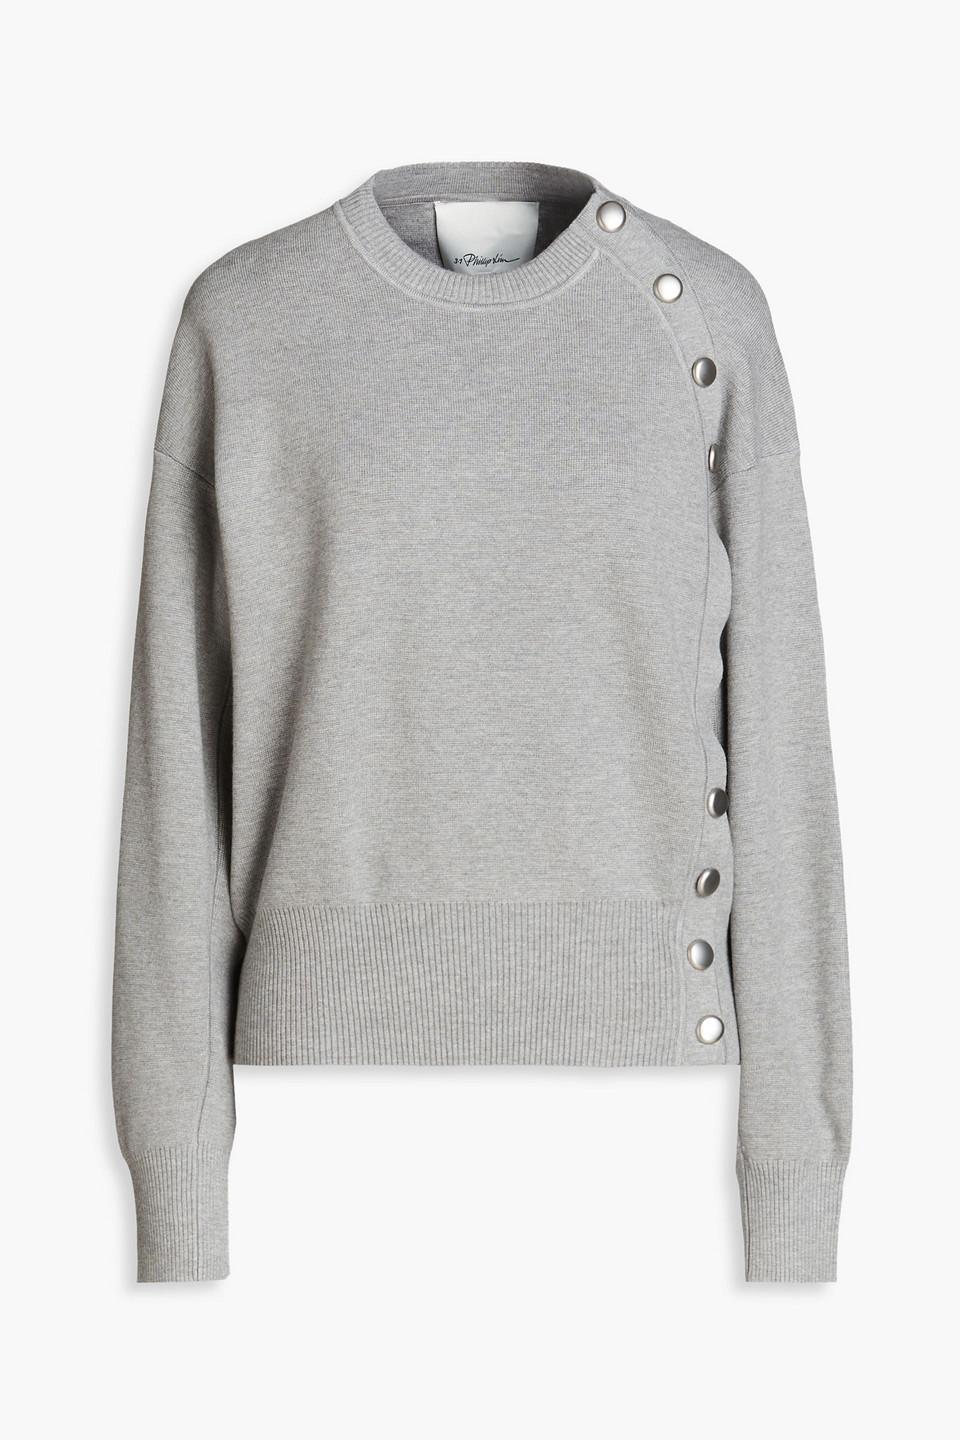 audition Grusom Andesbjergene 3.1 Phillip Lim Embellished Knitted Sweater in Gray | Lyst